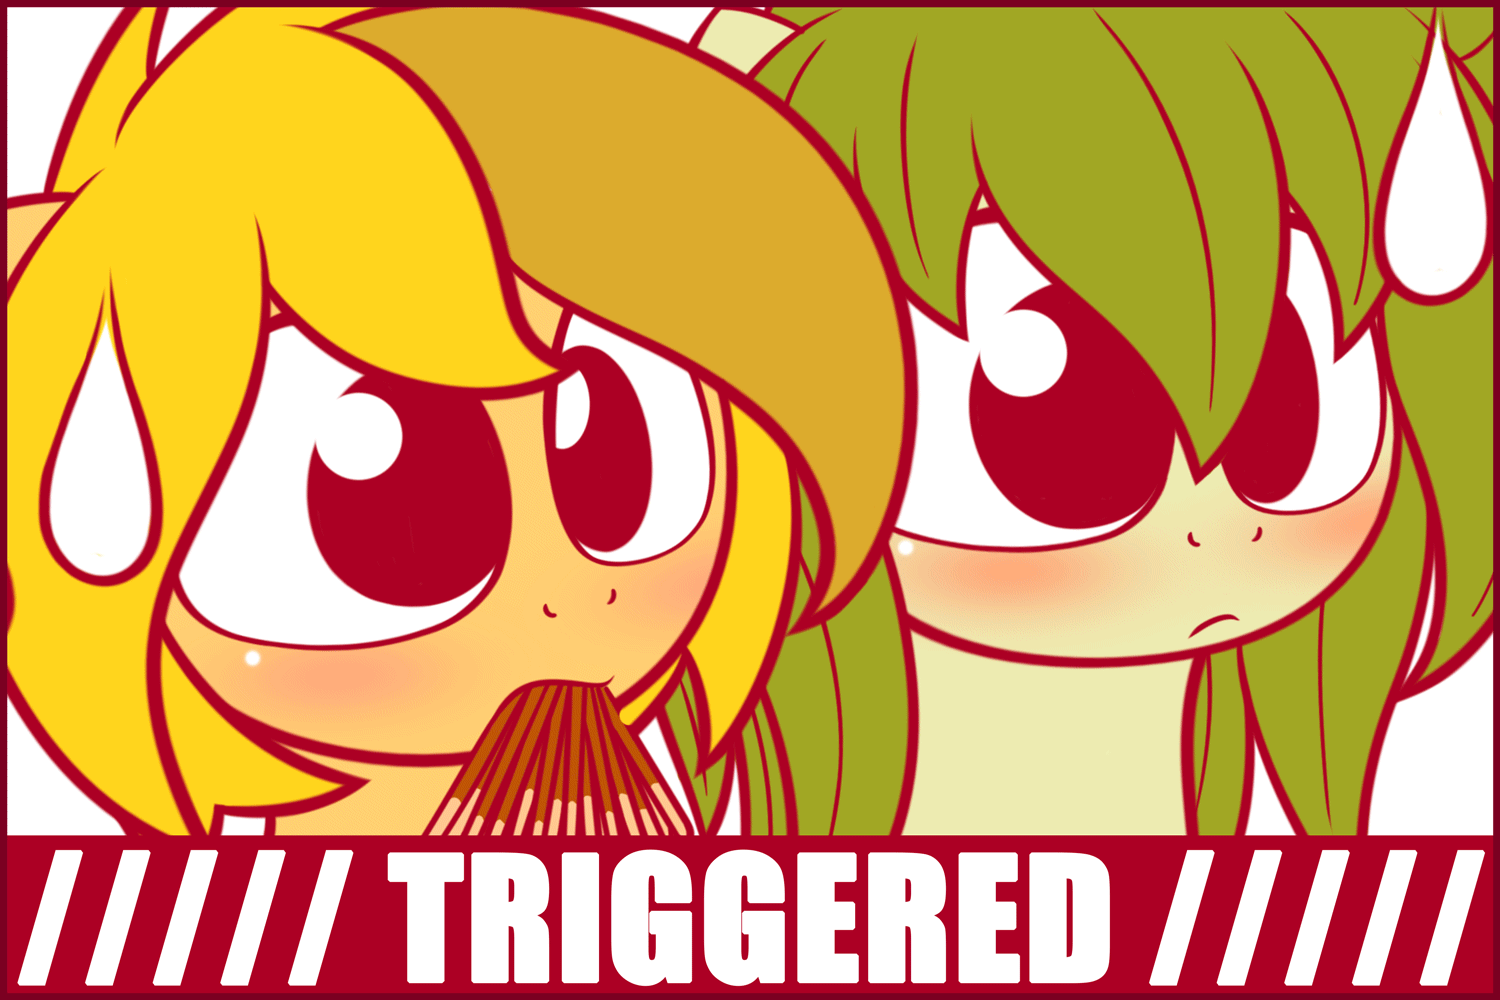 Triggered!!! by SymbianL